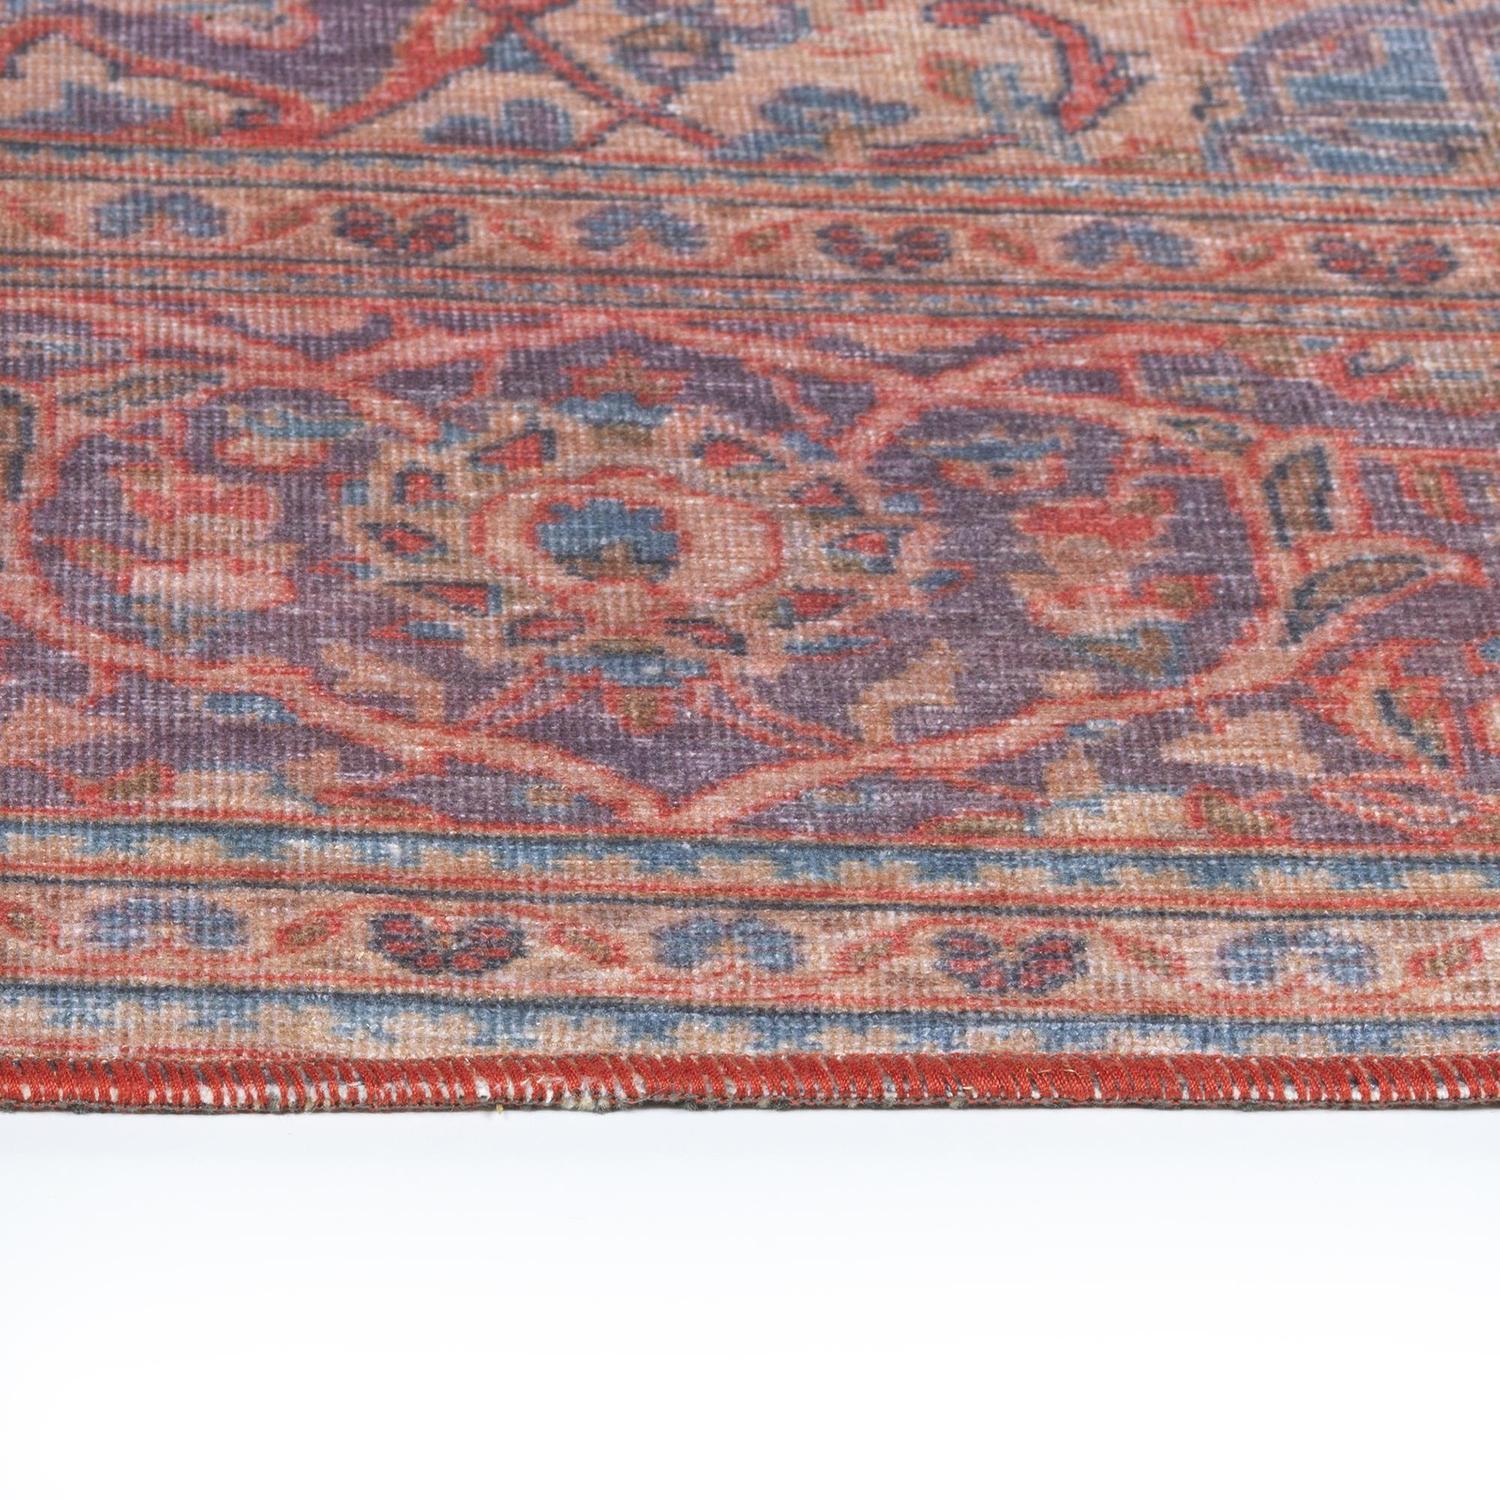 Kaleen Boho Patio BOH03-99 Rug in Coral - (2 Foot 3 Inch x 7 Foot 6 Inch) - image 2 of 5